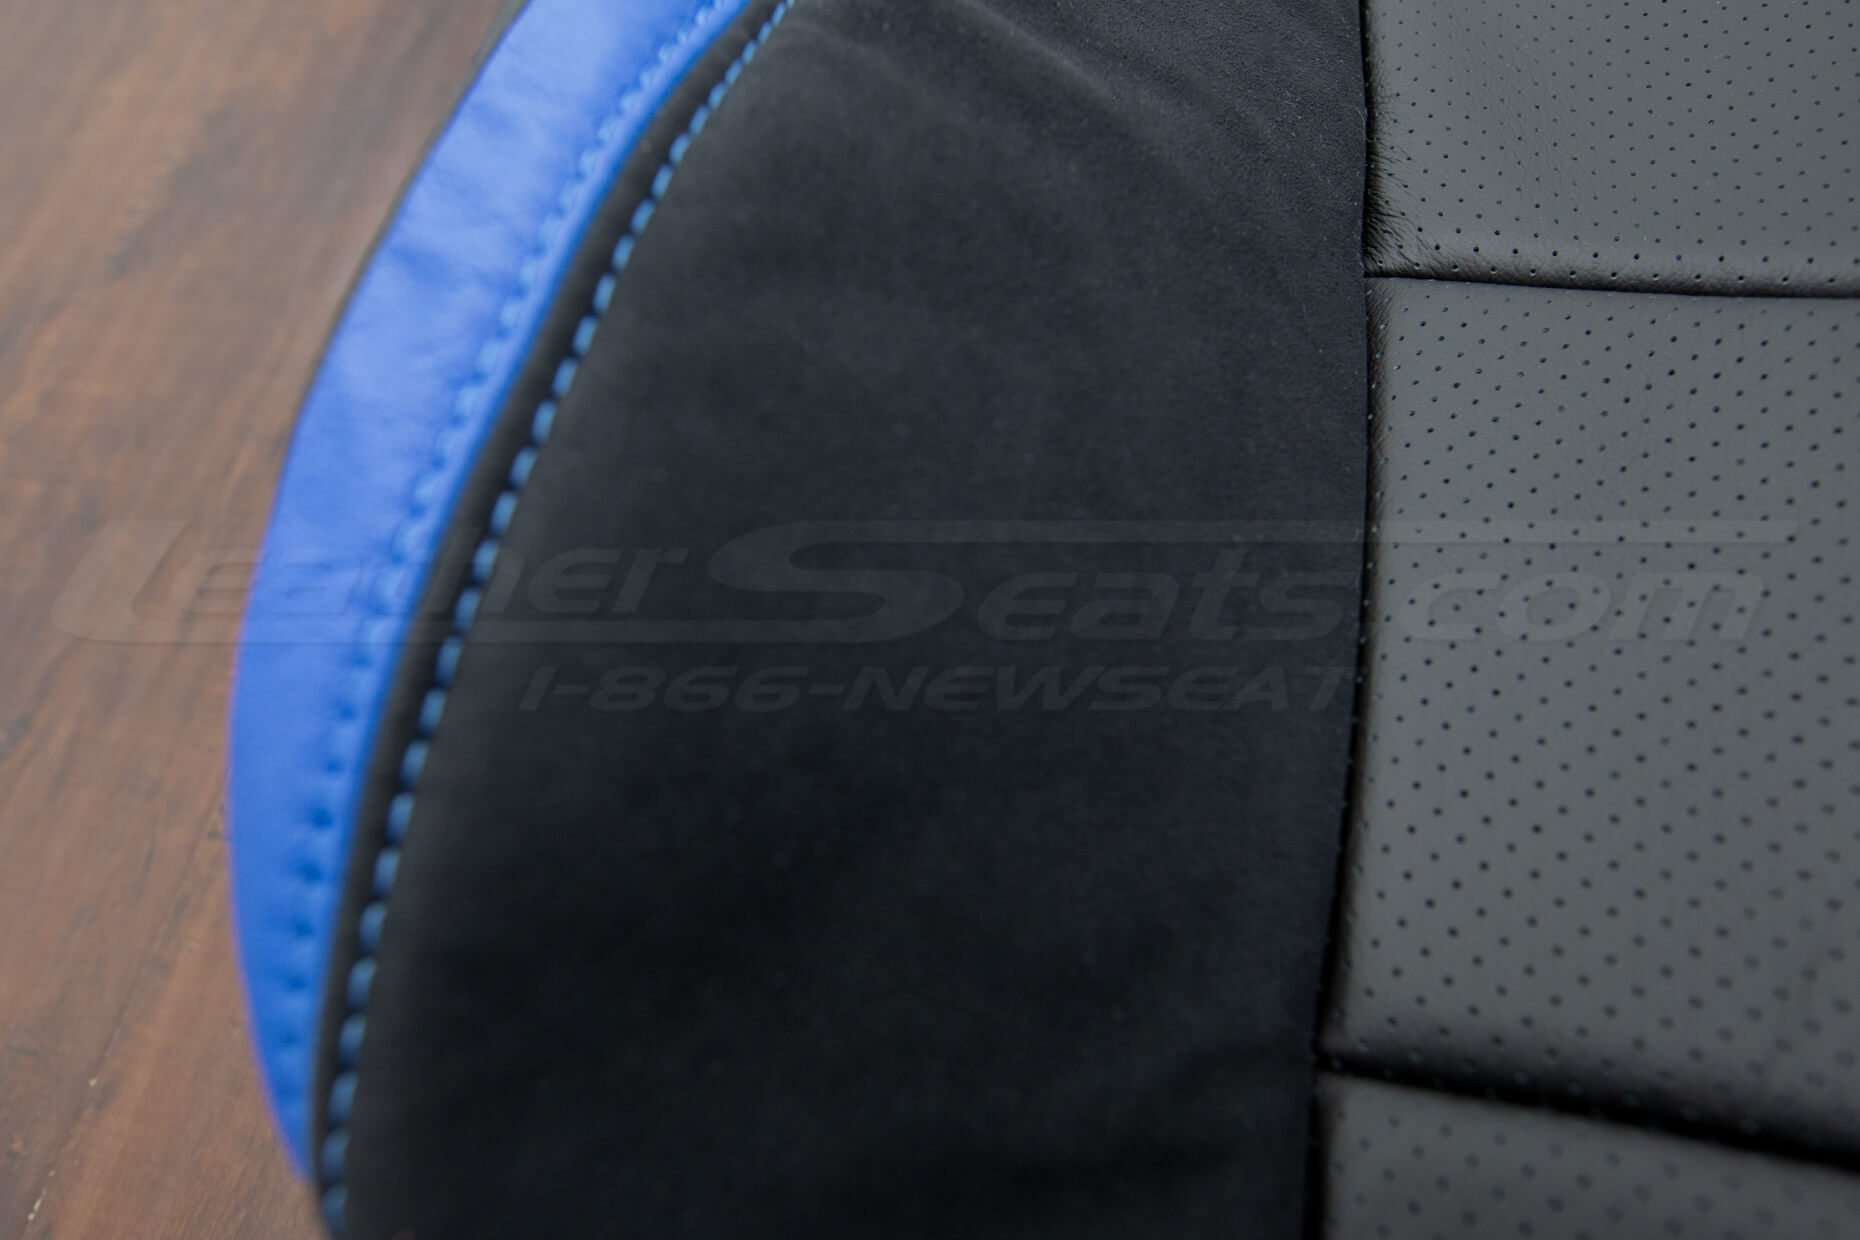 Ford Raptor Upholstery Kit - Black & Cobalt - Suede and perforation close-up